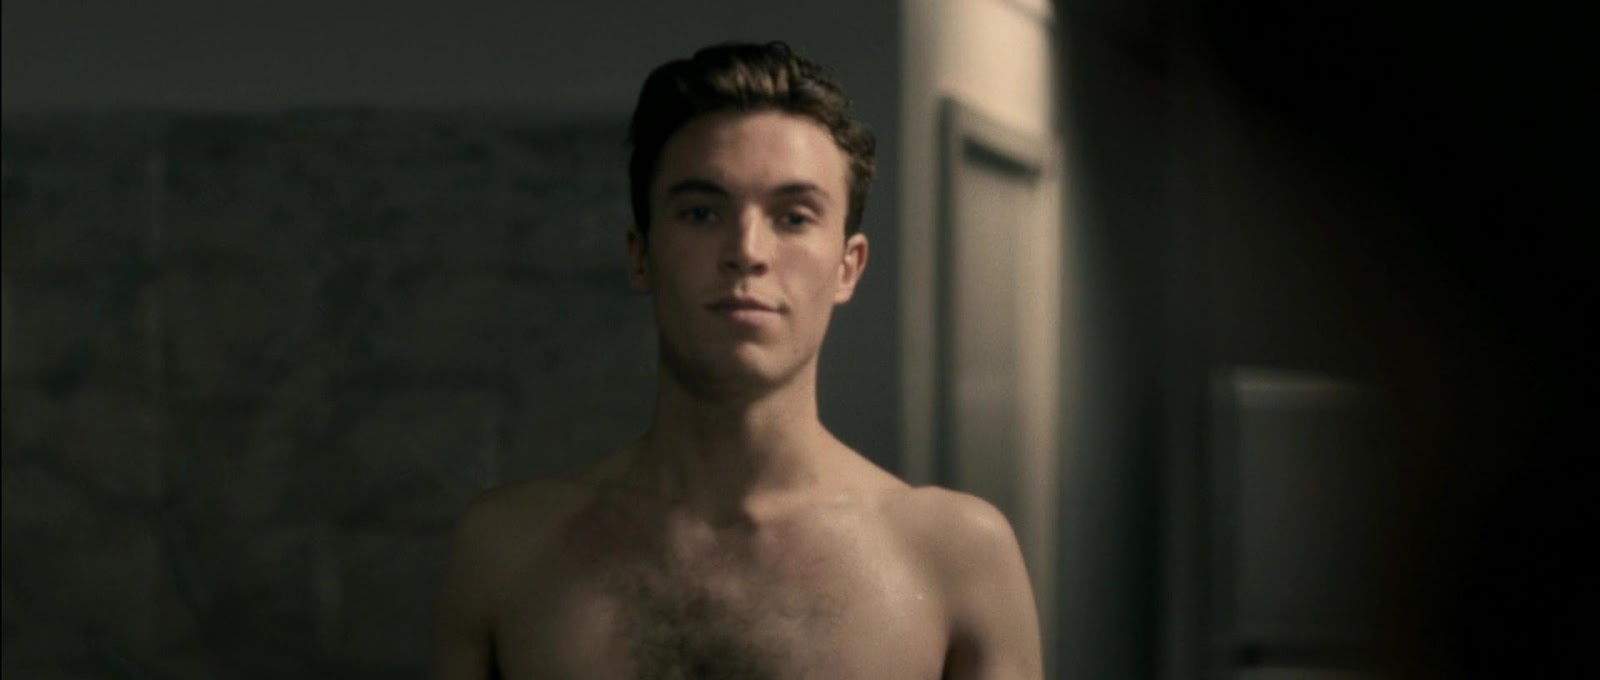 Tom hughes nude - 🧡 Shirtless Men On The Blog: Tom Hughes Mostra Il Sedere...